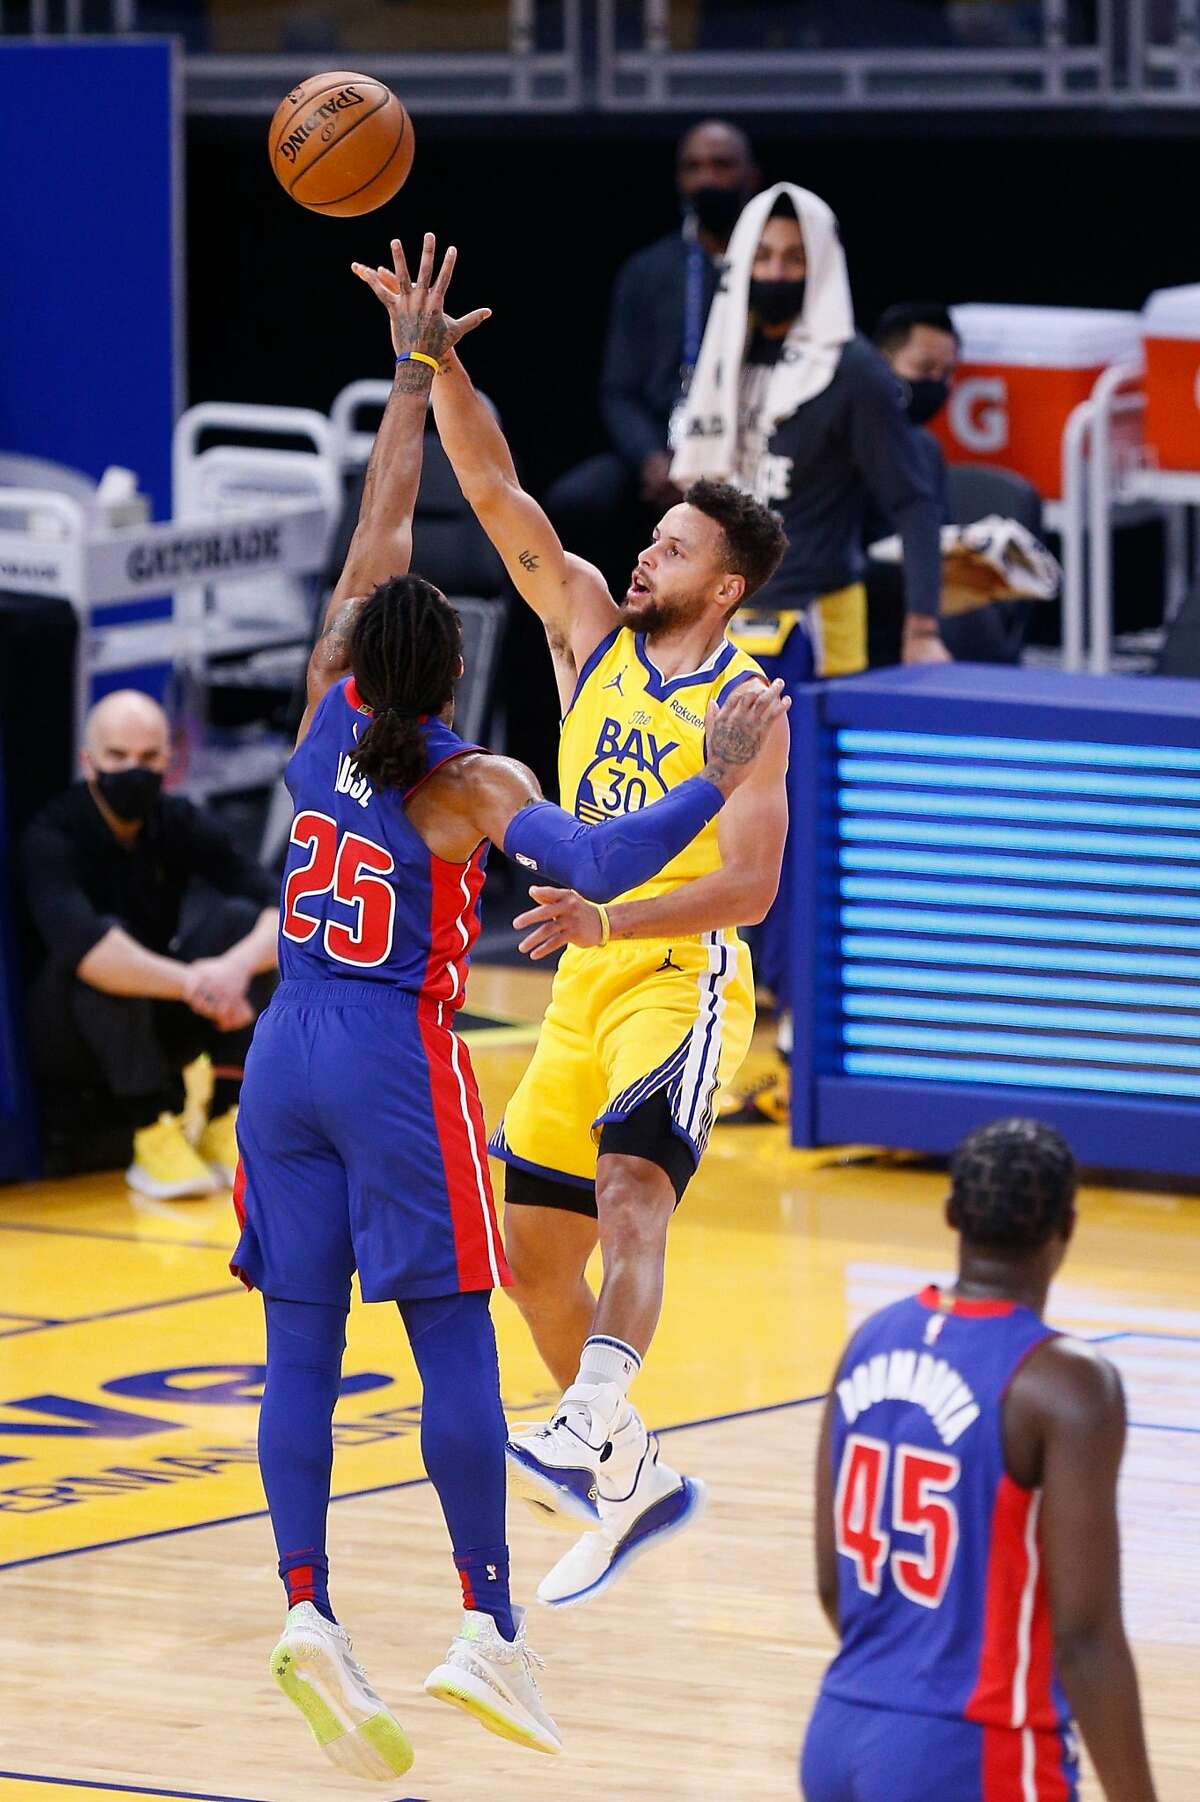 Golden State Warriors guard Stephen Curry (30) scores a two-point field goal against Detroit Pistons guard Derrick Rose (25) in the second period of an NBA game at Chase Center on Saturday, Jan. 30, 2021, in San Francisco, Calif.